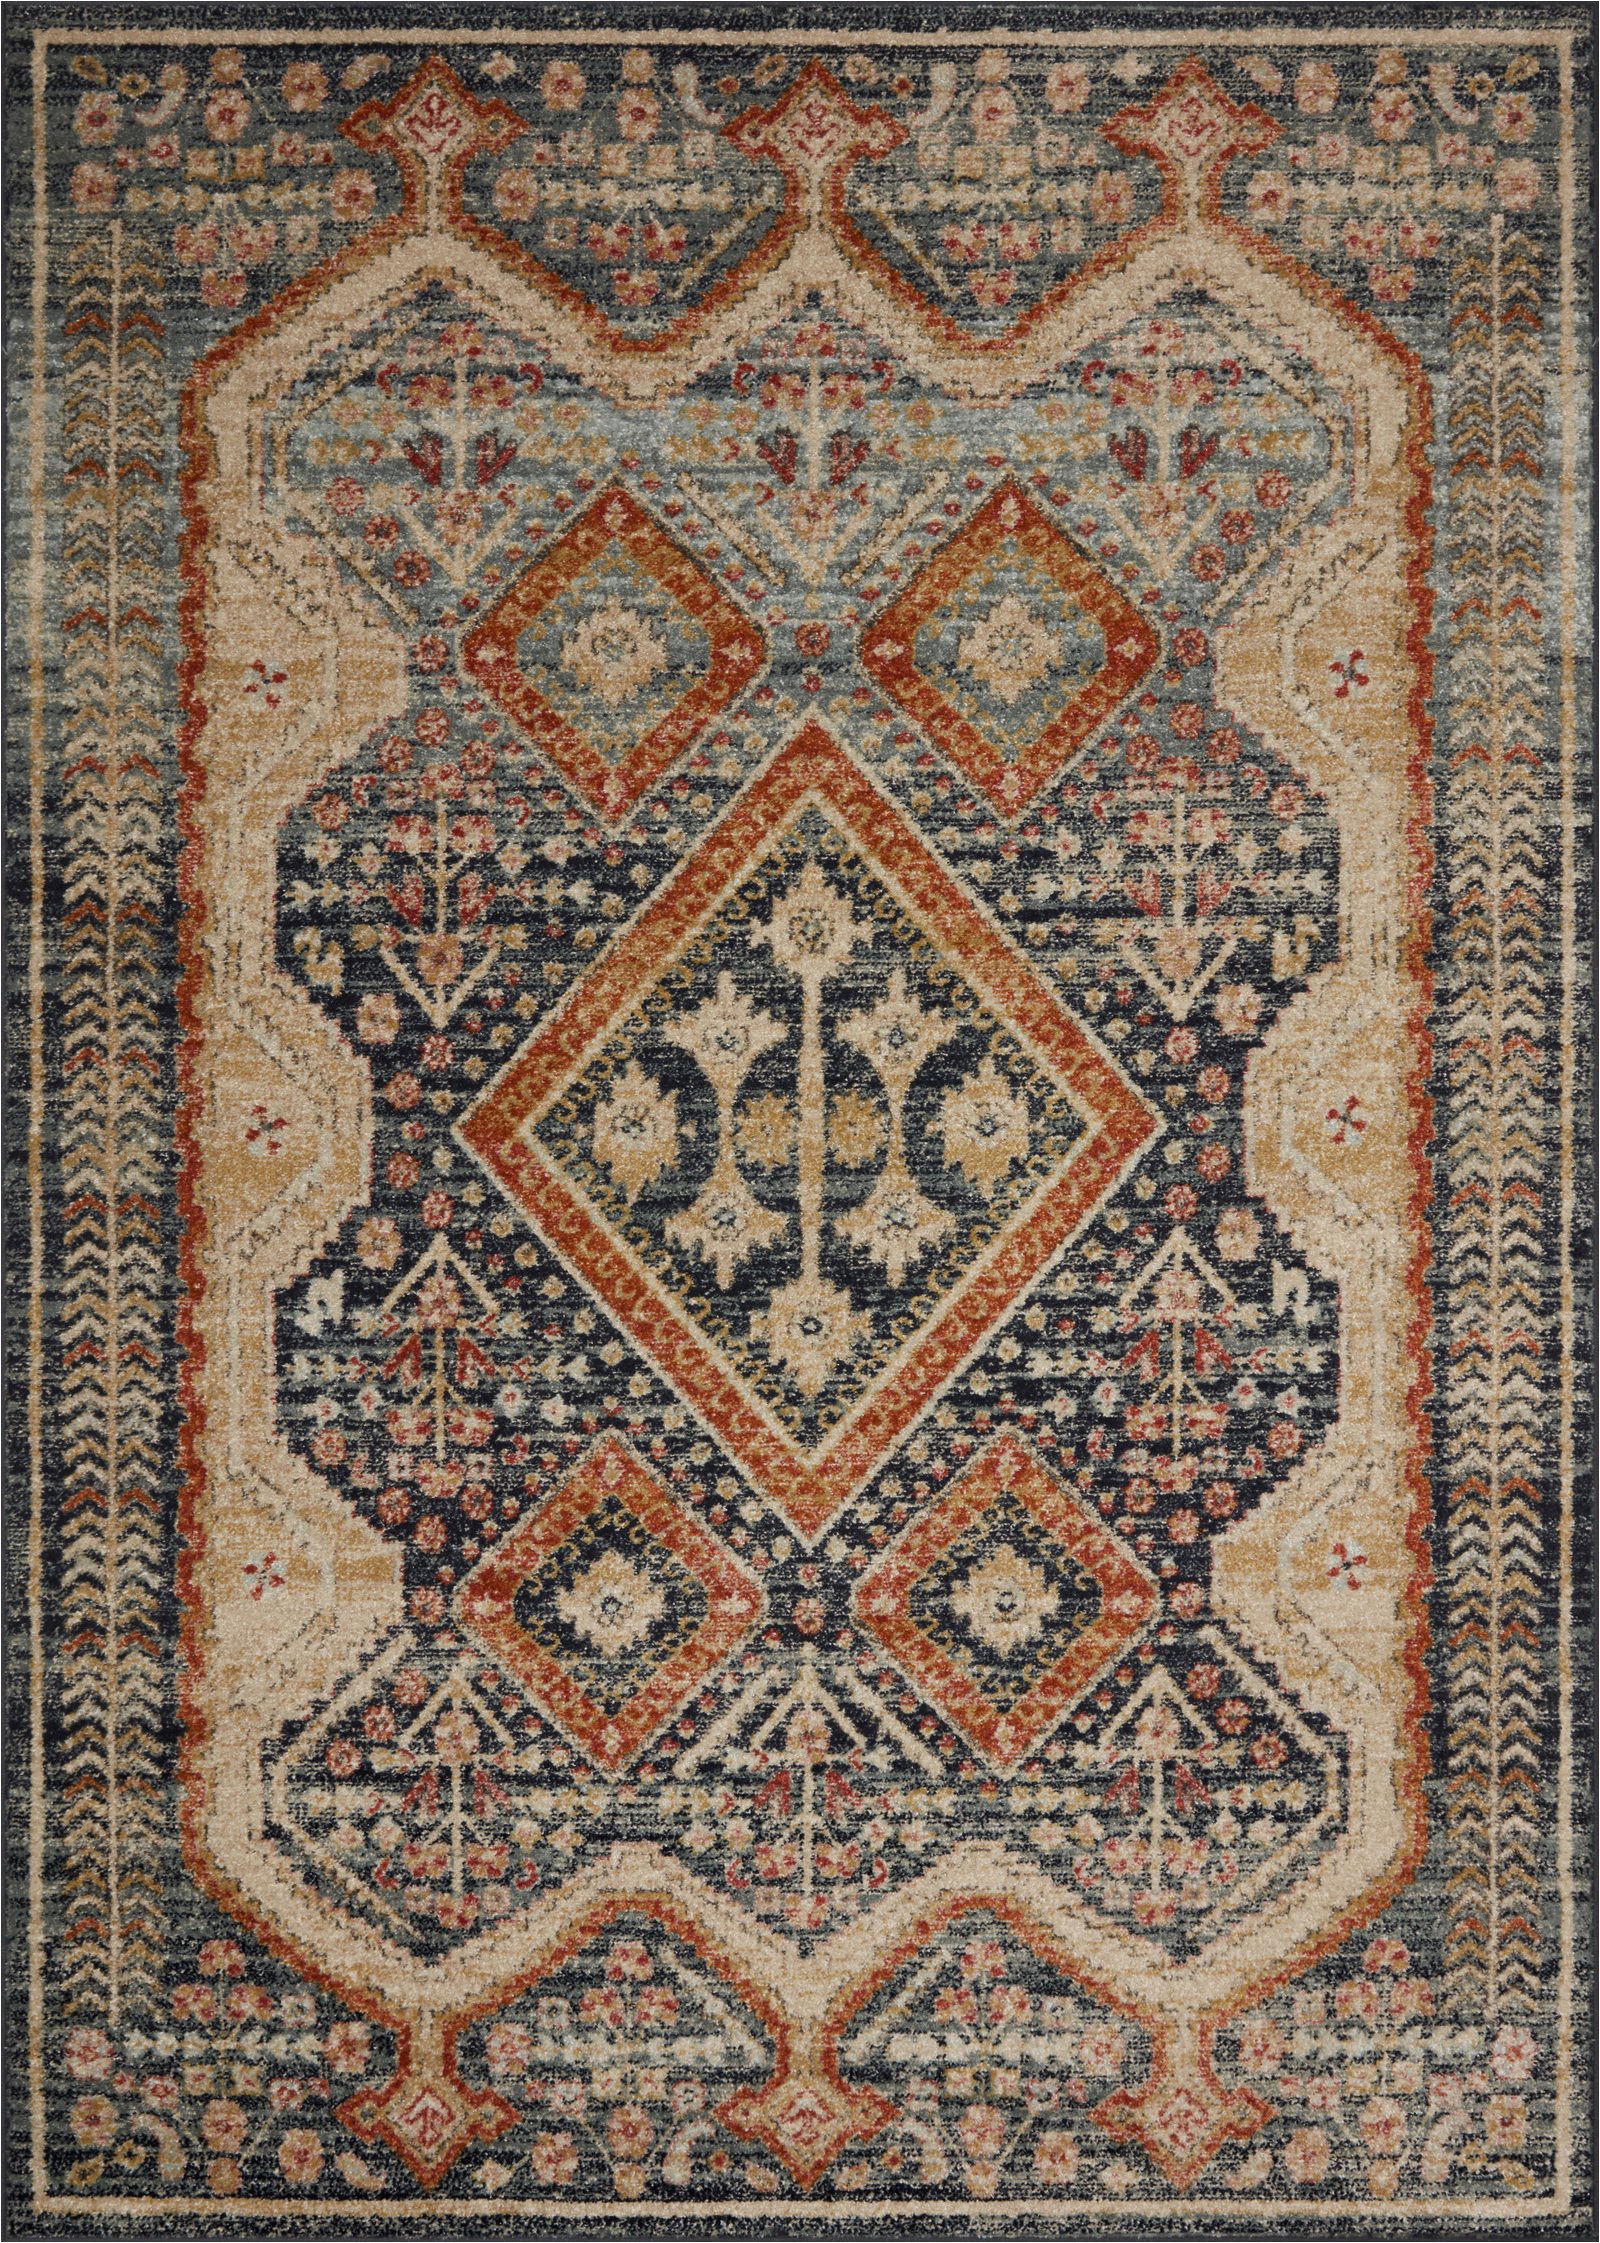 8 X 10 Round area Rugs Pacific northwest Rustic Style area Rugs